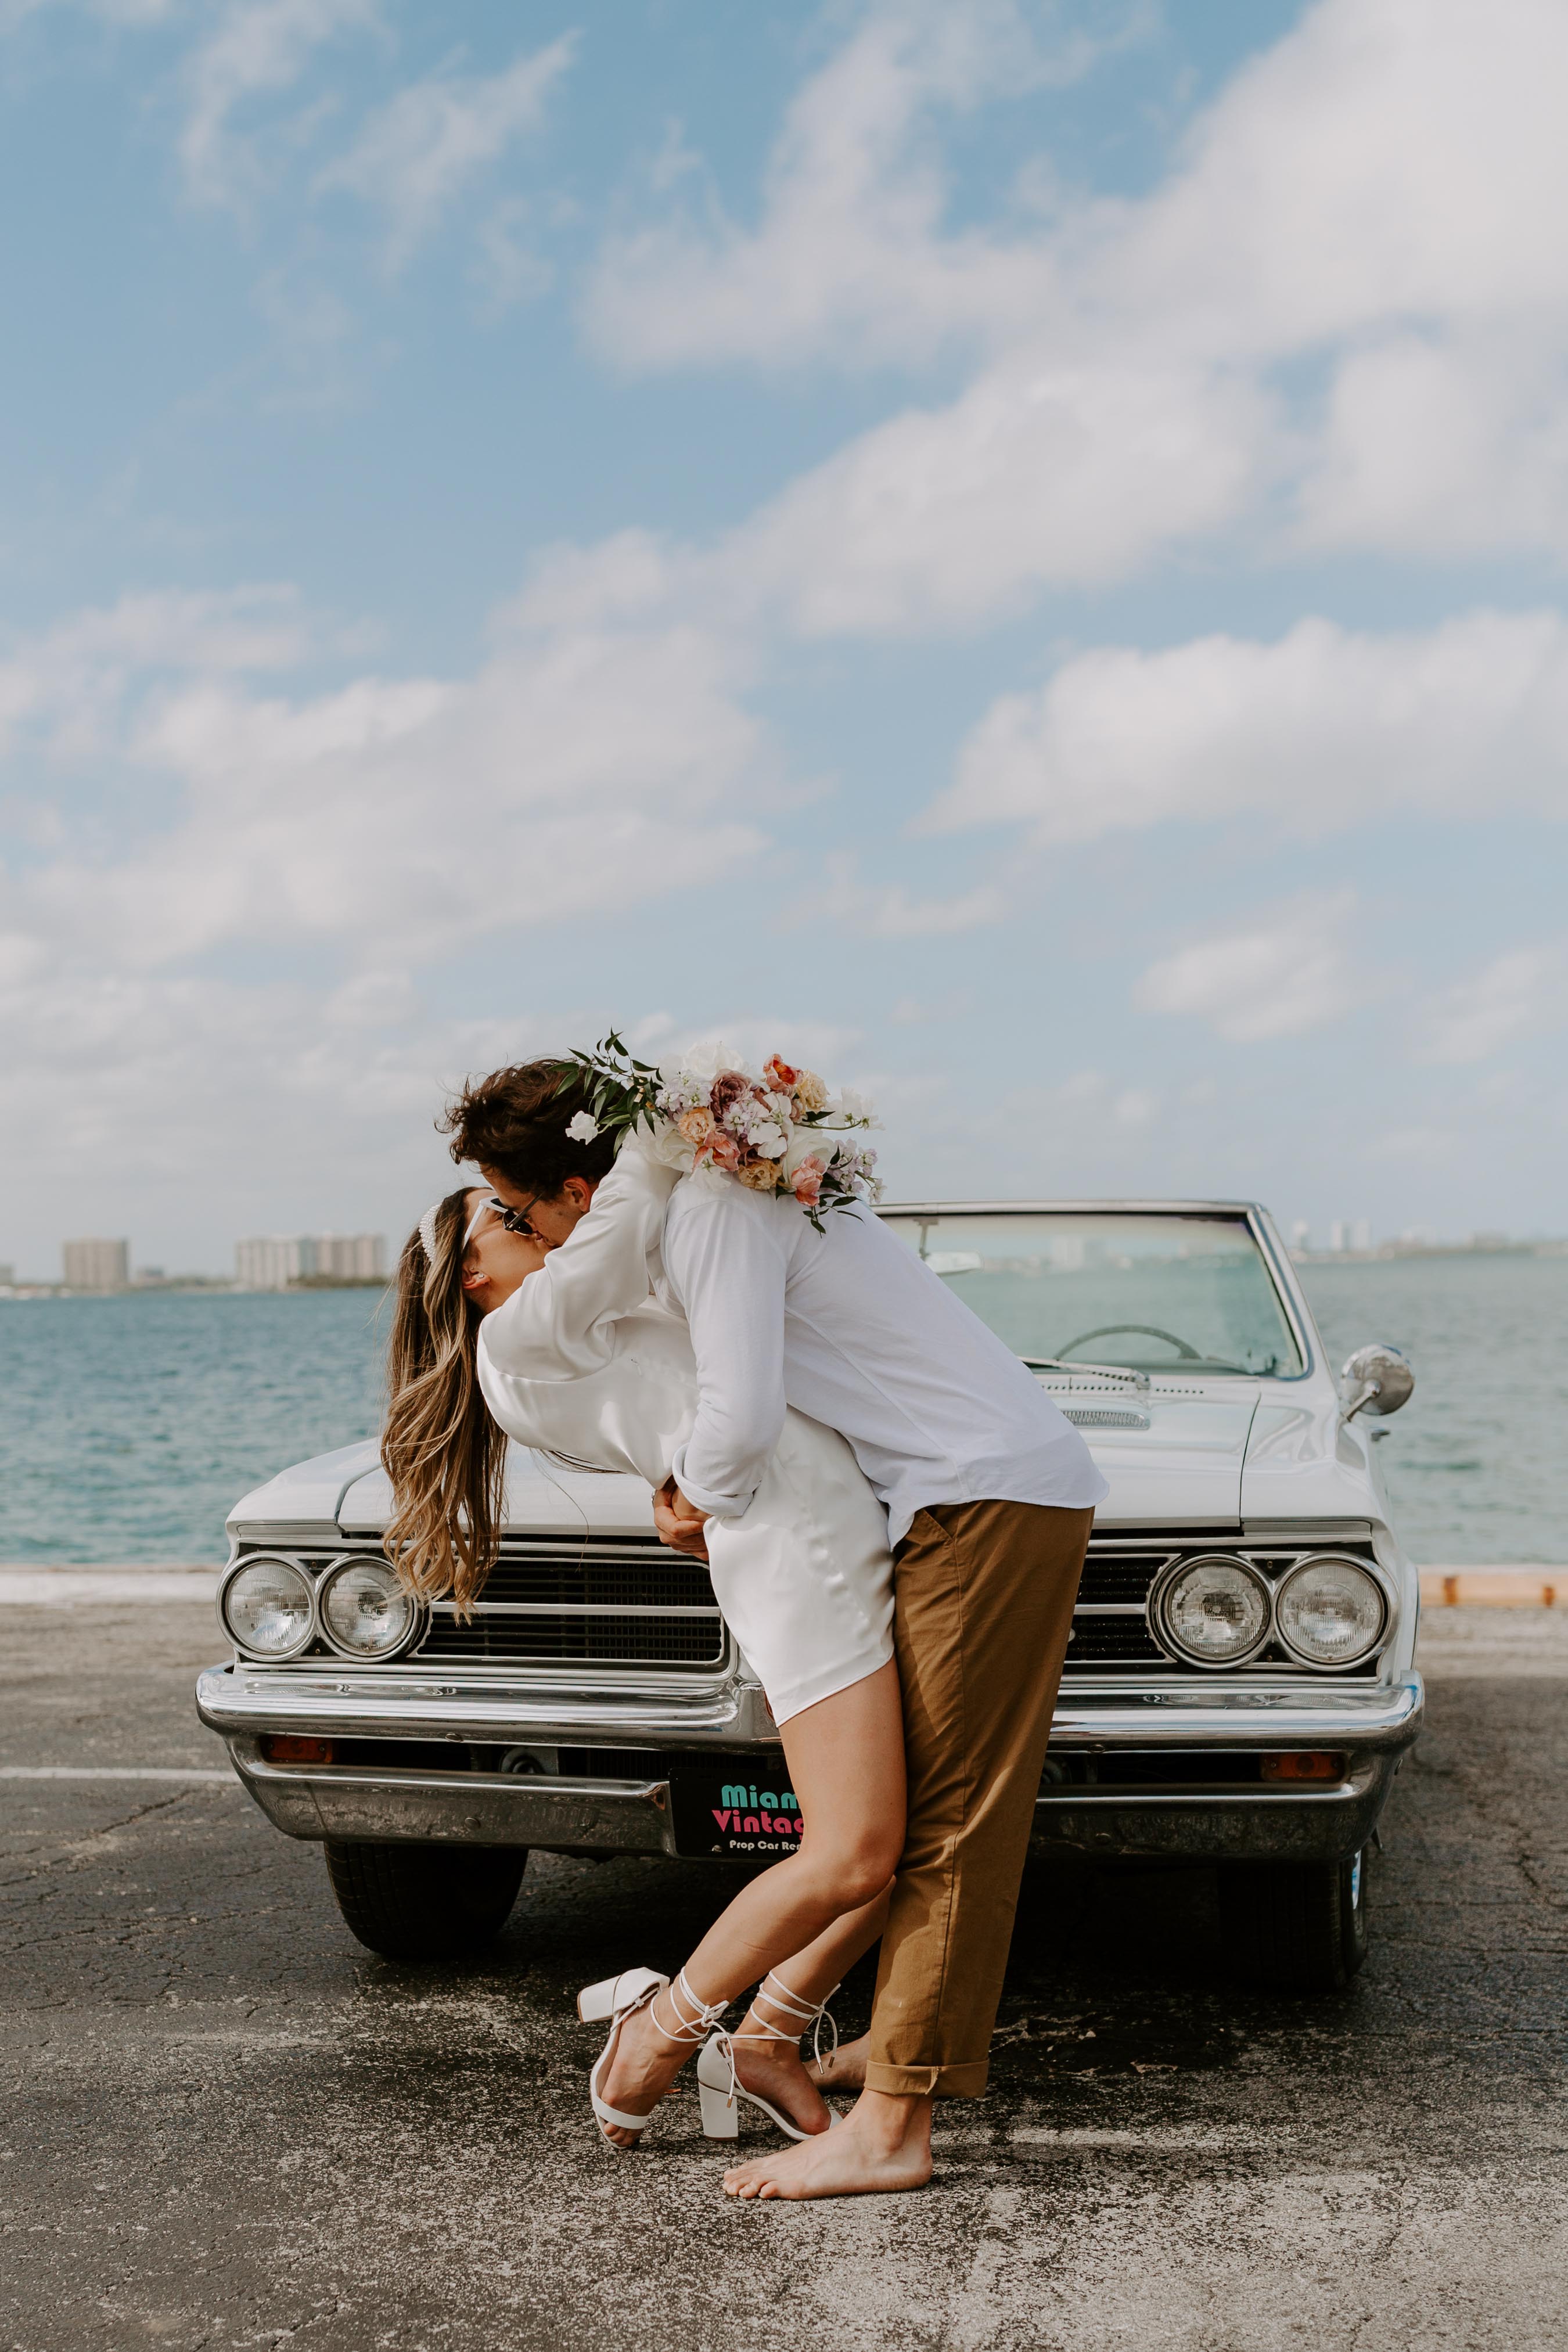 Bride and groom posing in front of vintage white car